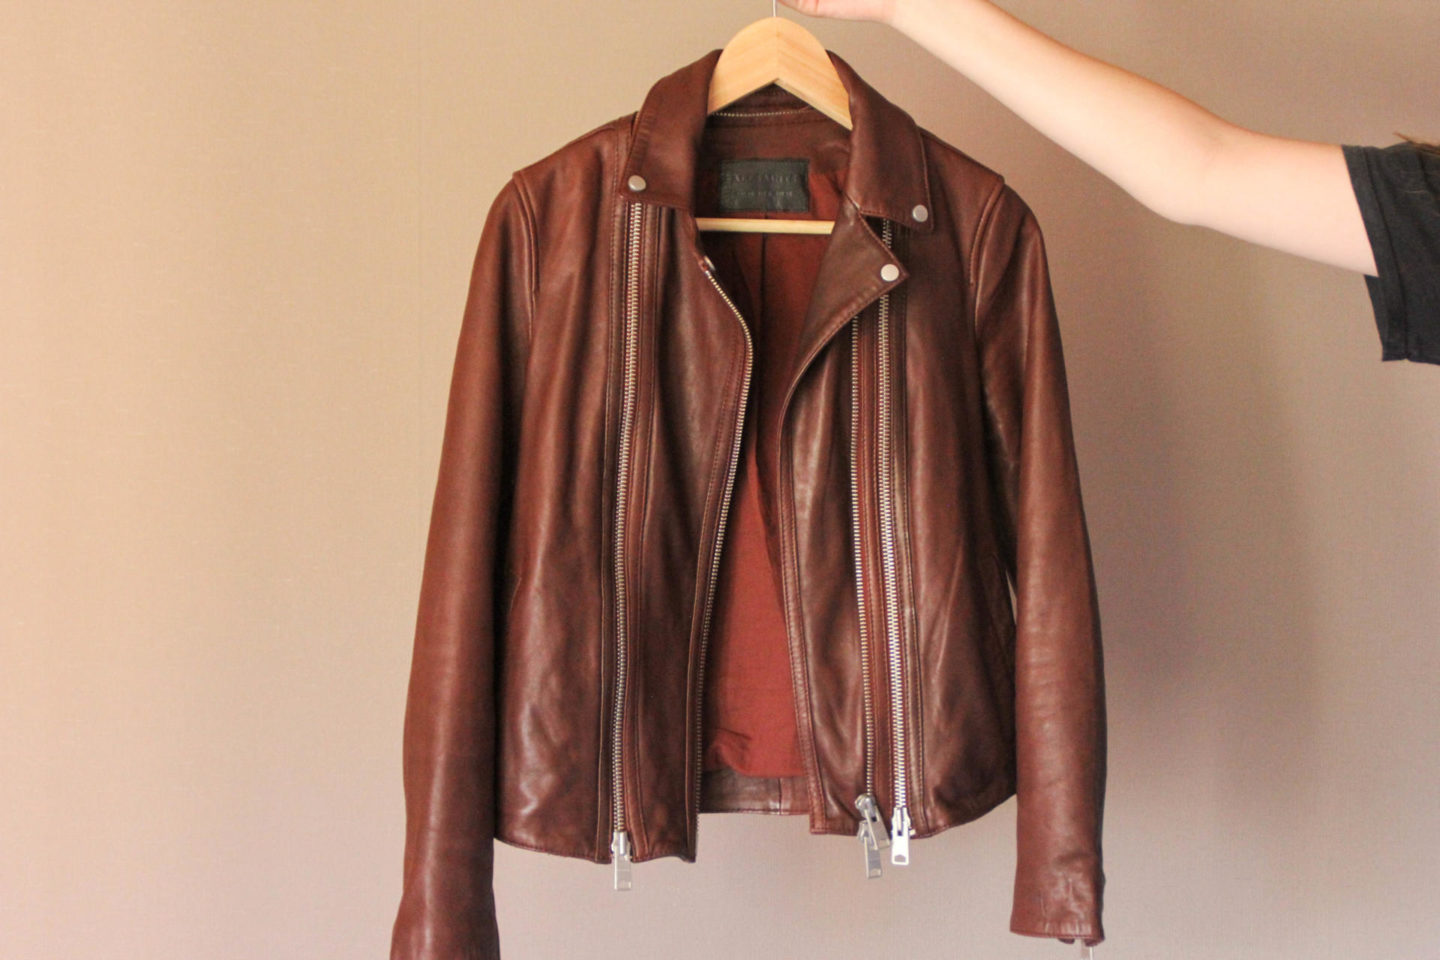 All Saints red leather jacket